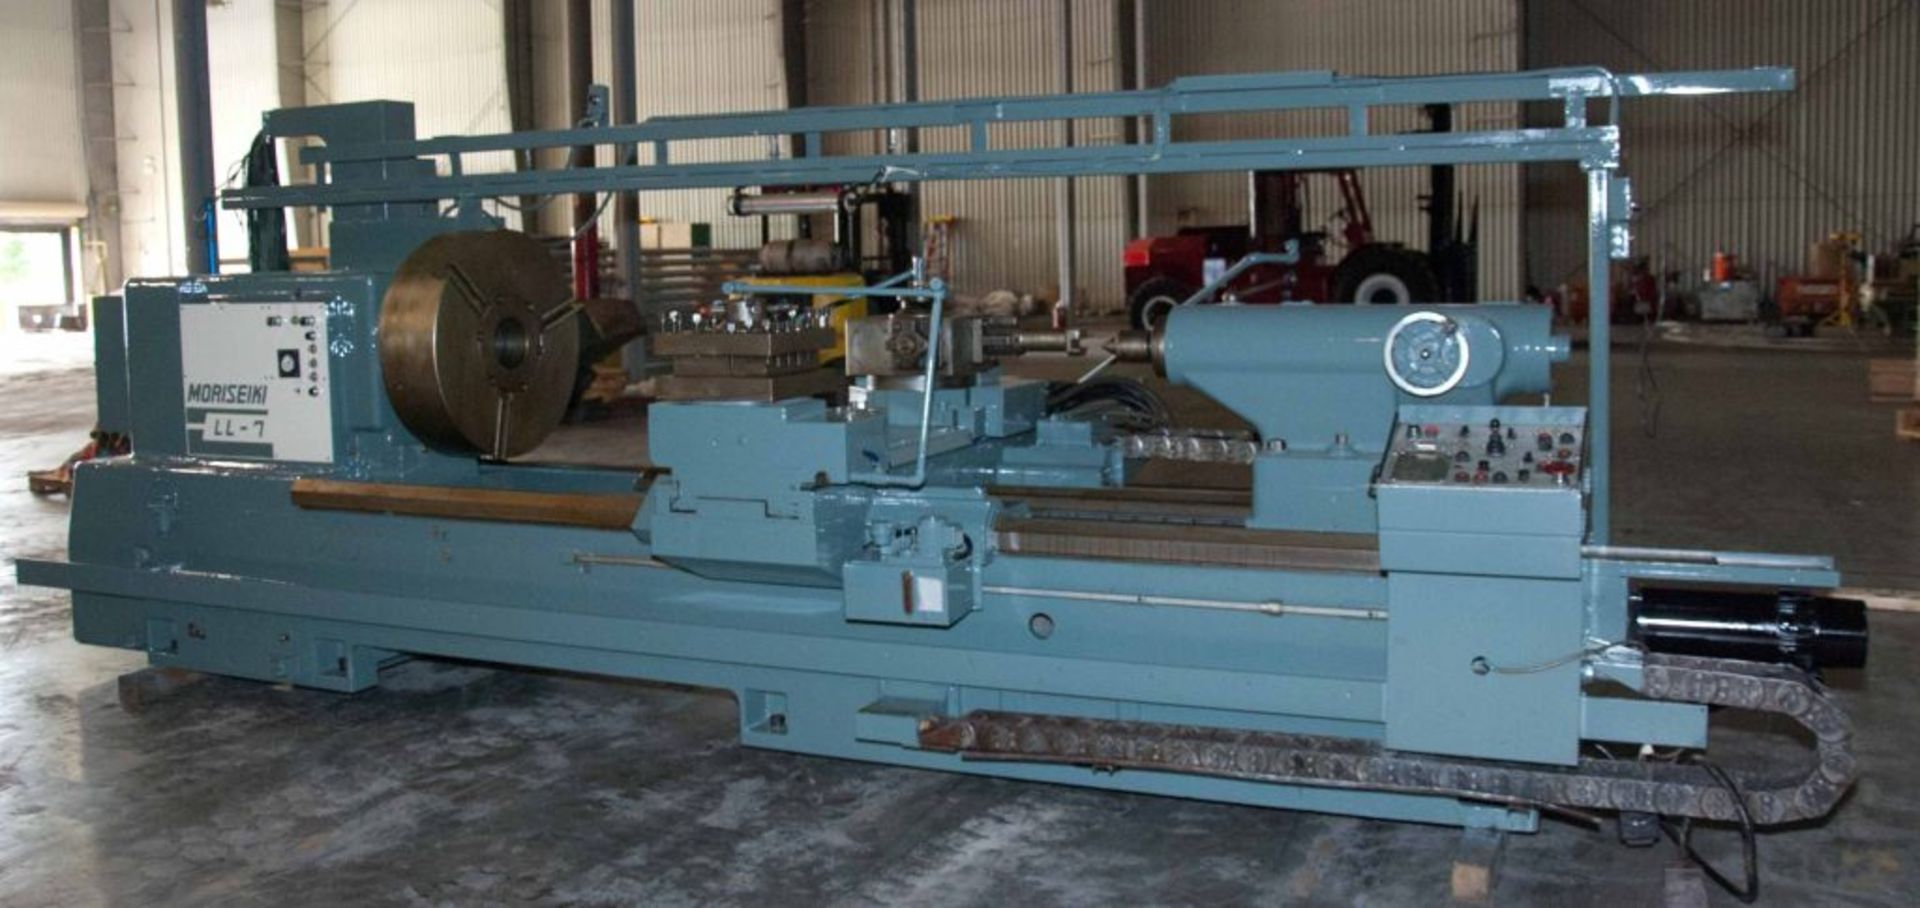 MORI SEIKI MDL. LL-7 CNC FLAT BED LATHE, Fanuc 6TB CNC control, 42.9” sw. over bed, 20.4” sw. over